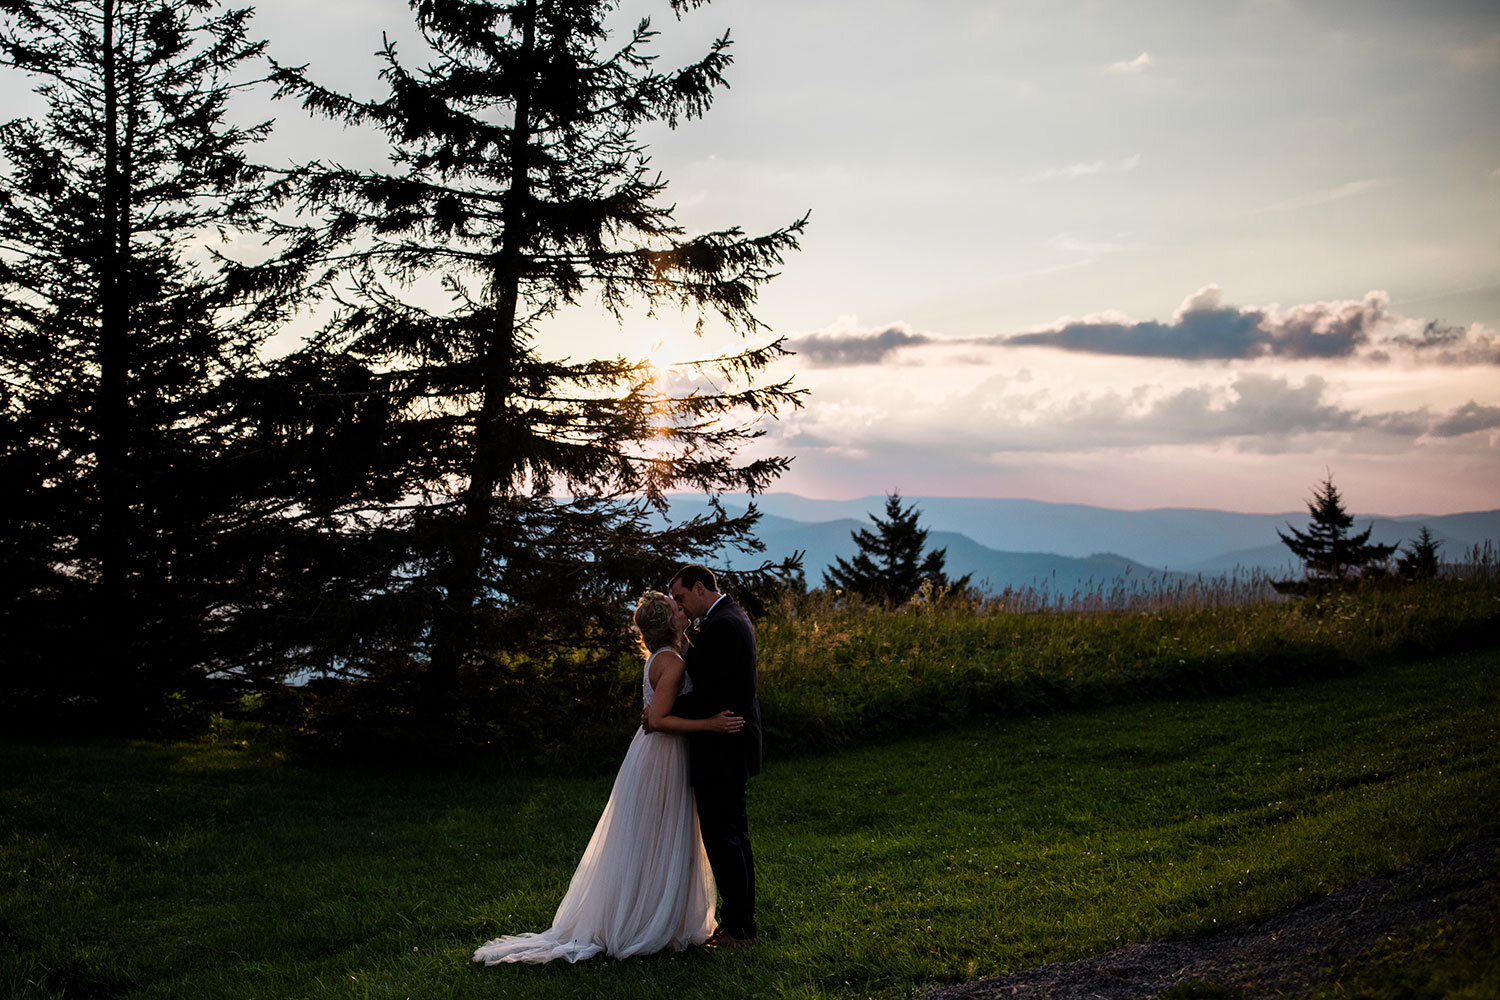 A night portrait after a recent wedding at Snowshoe Resort.